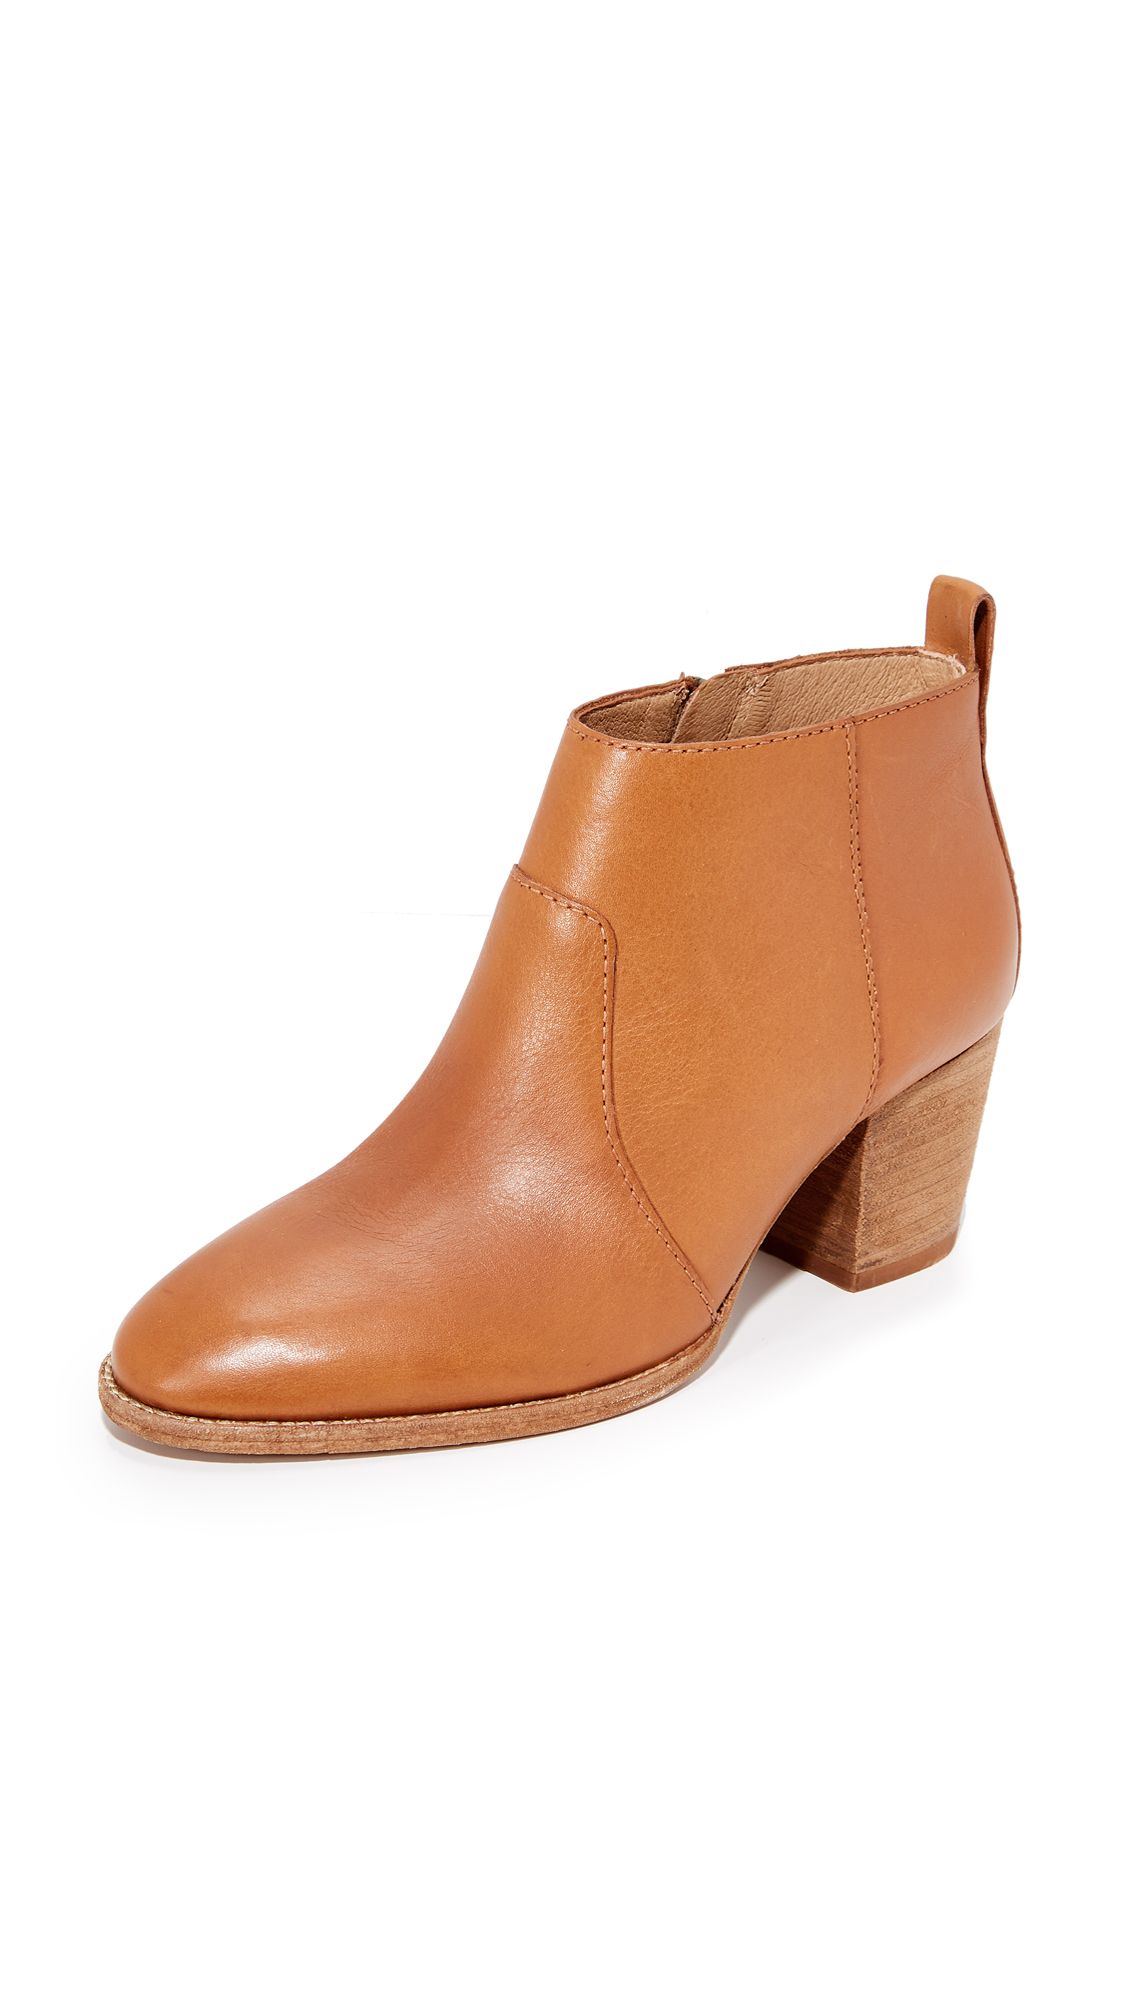 Madewell Brenner Boots | Shopbop